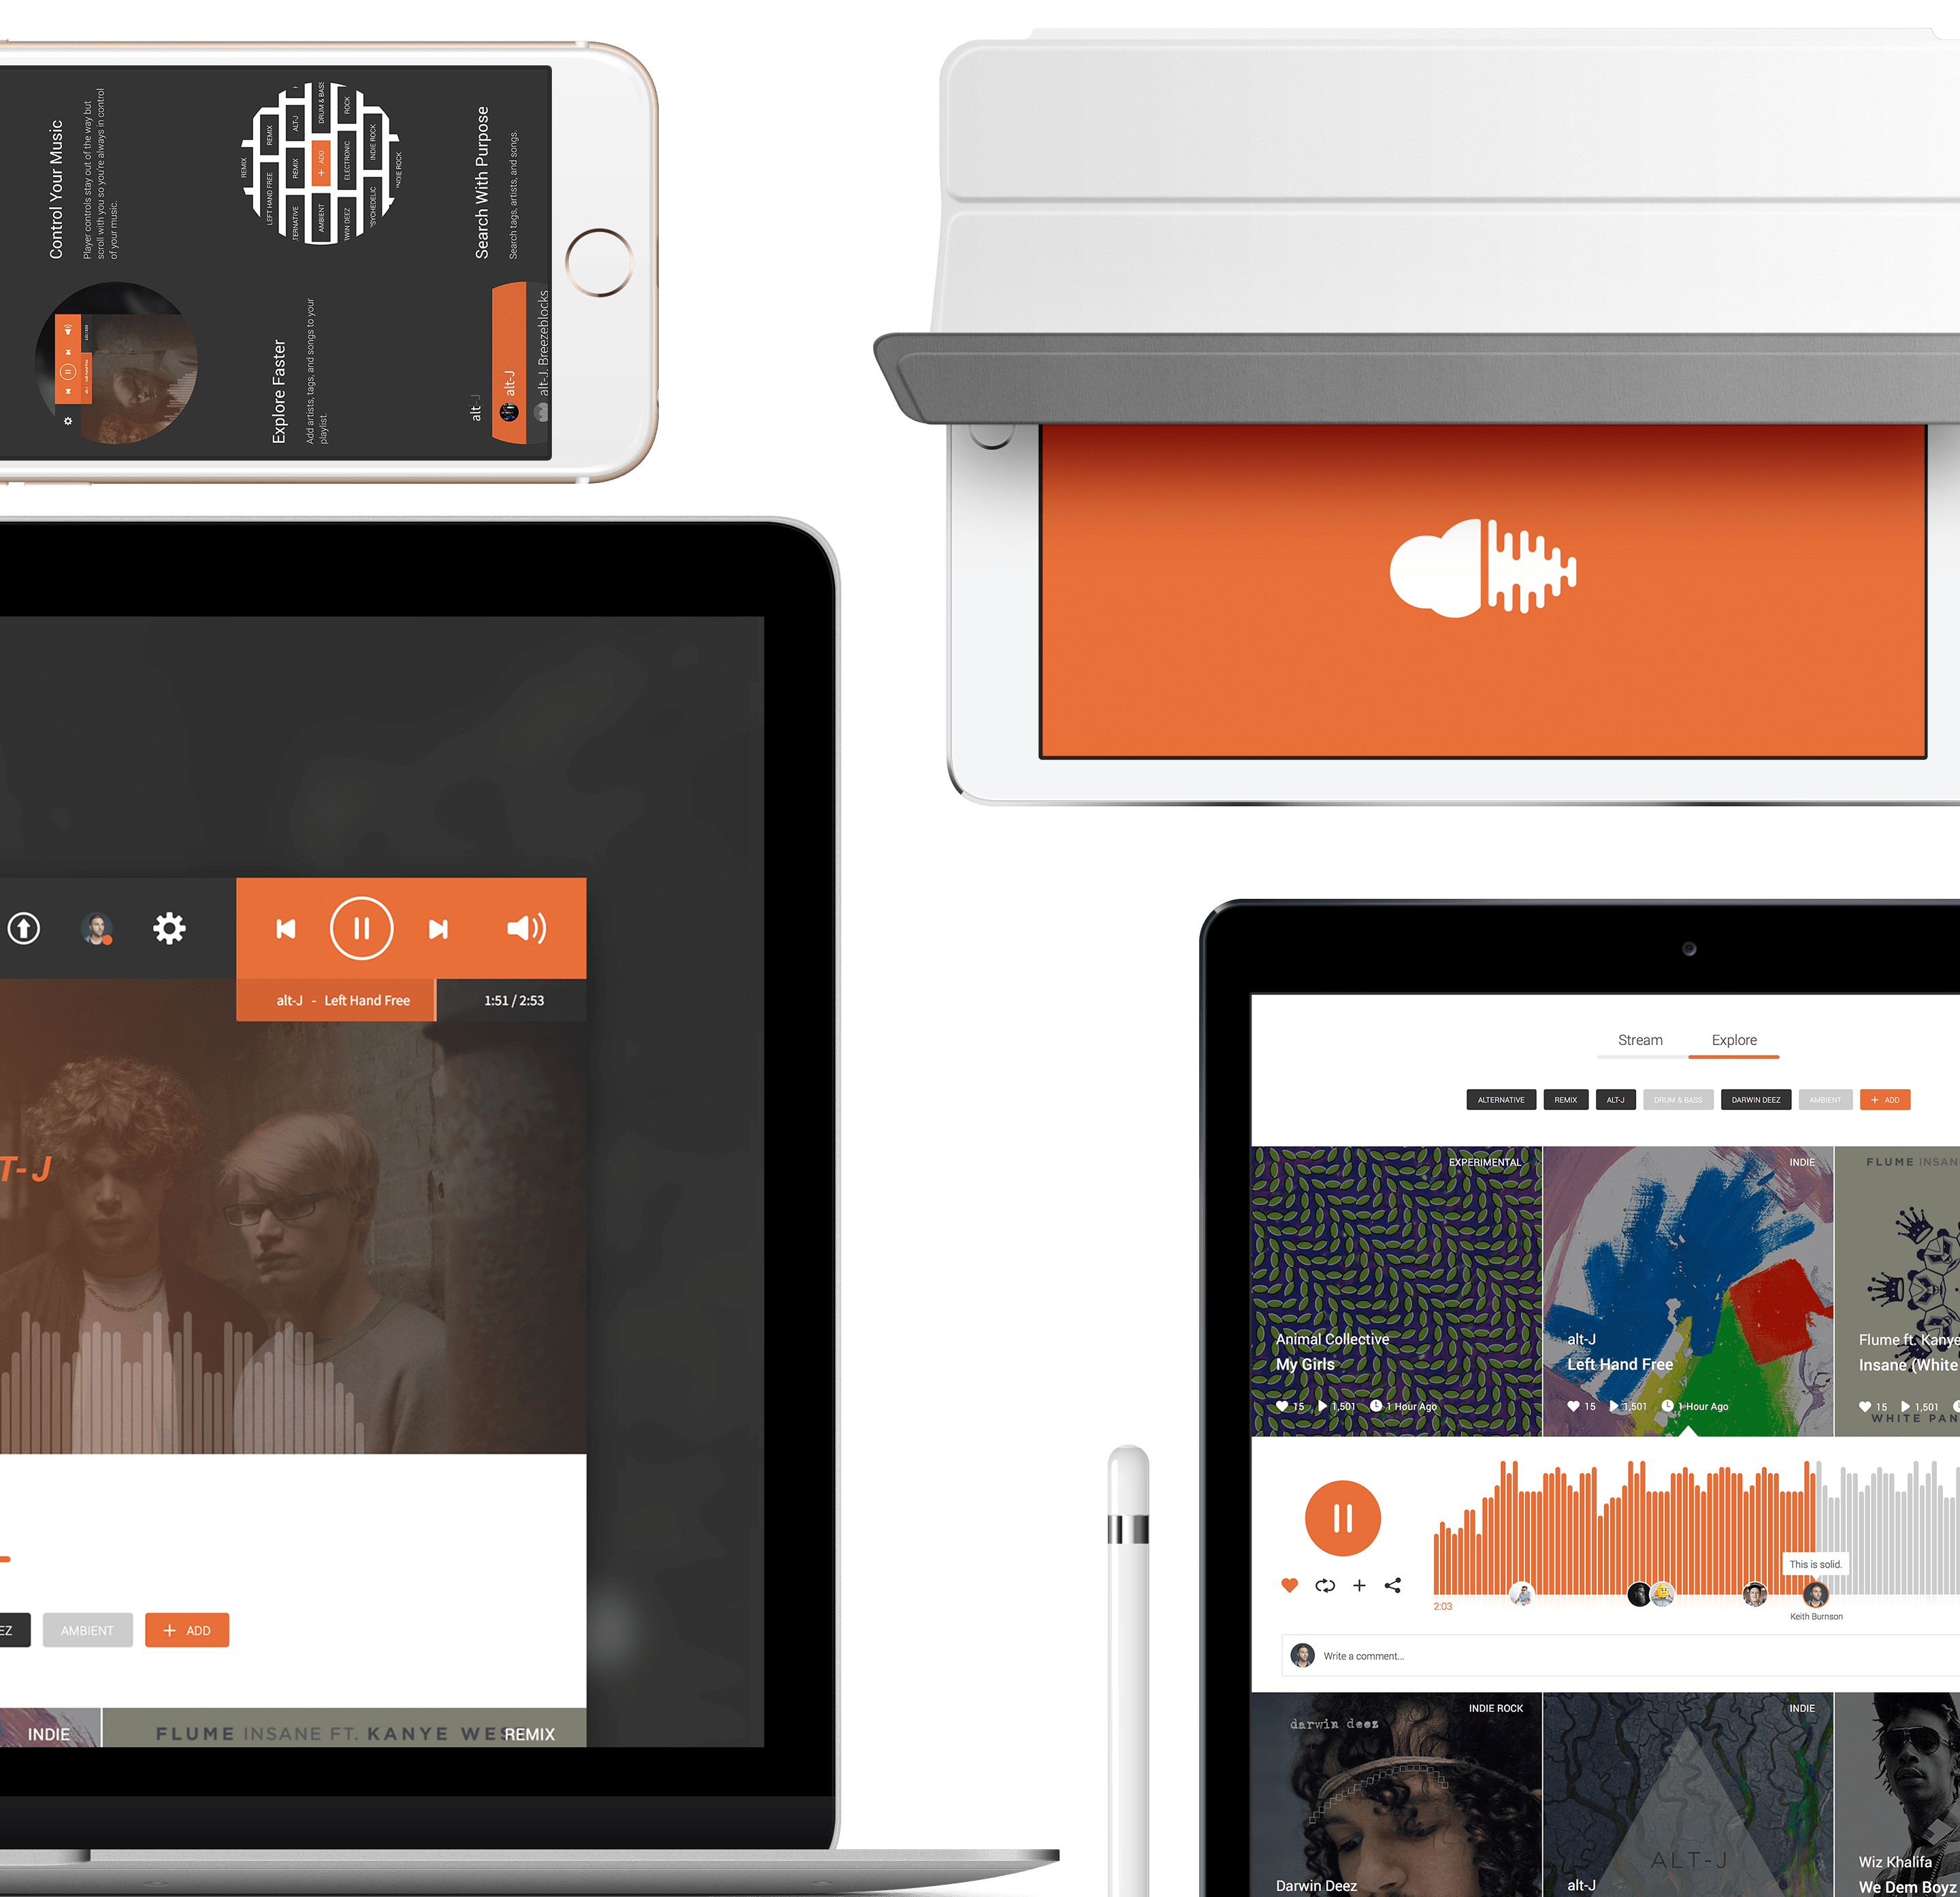 devices with SoundCloud service